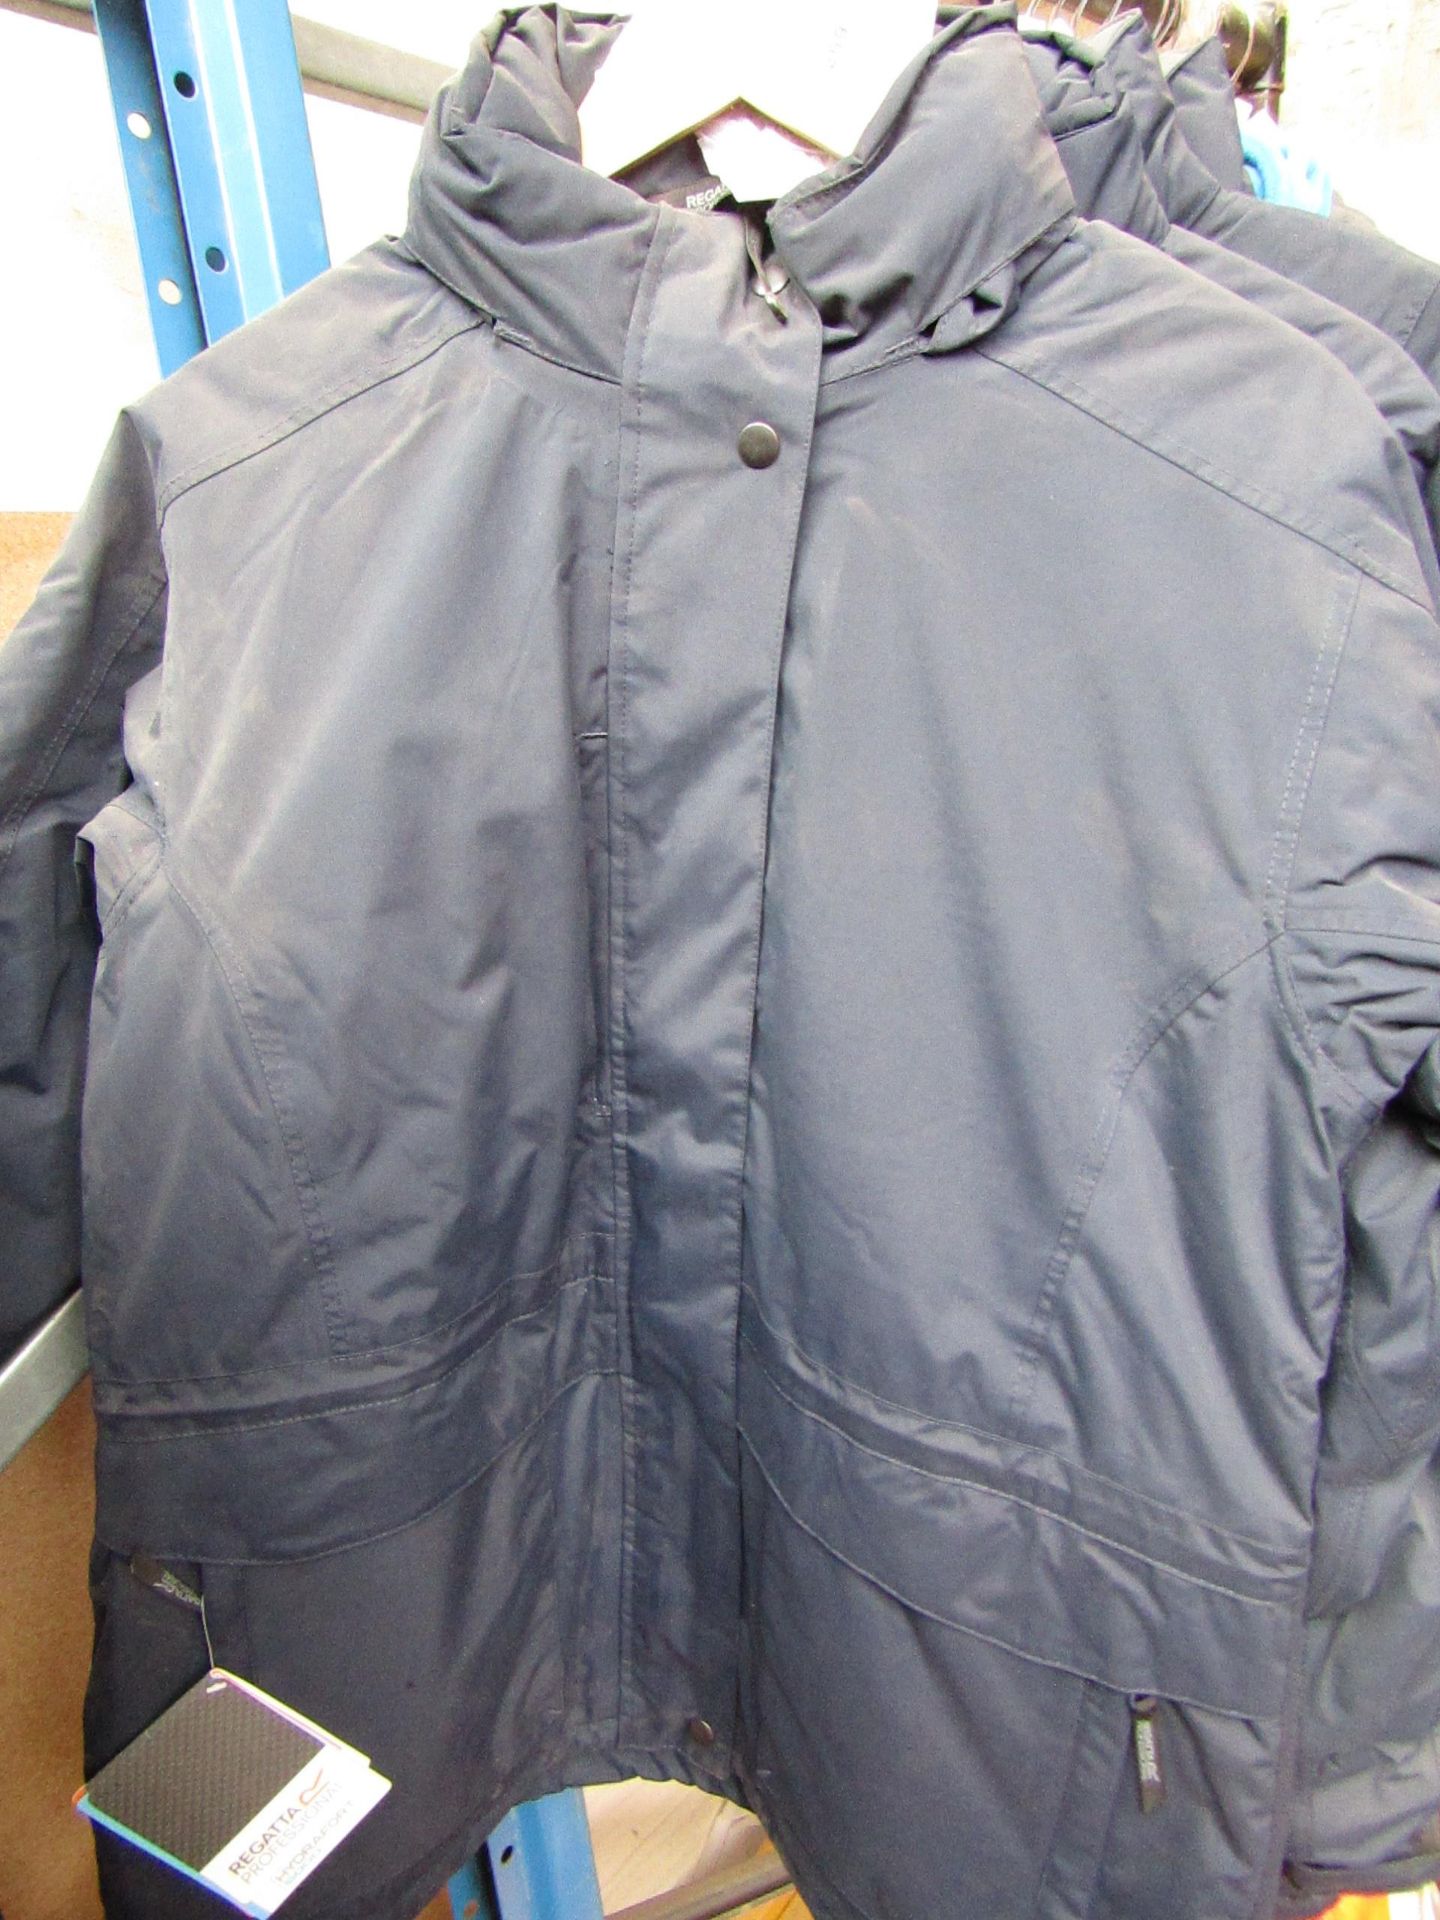 Regatta Wind Proof and water proof jacket, new size 12